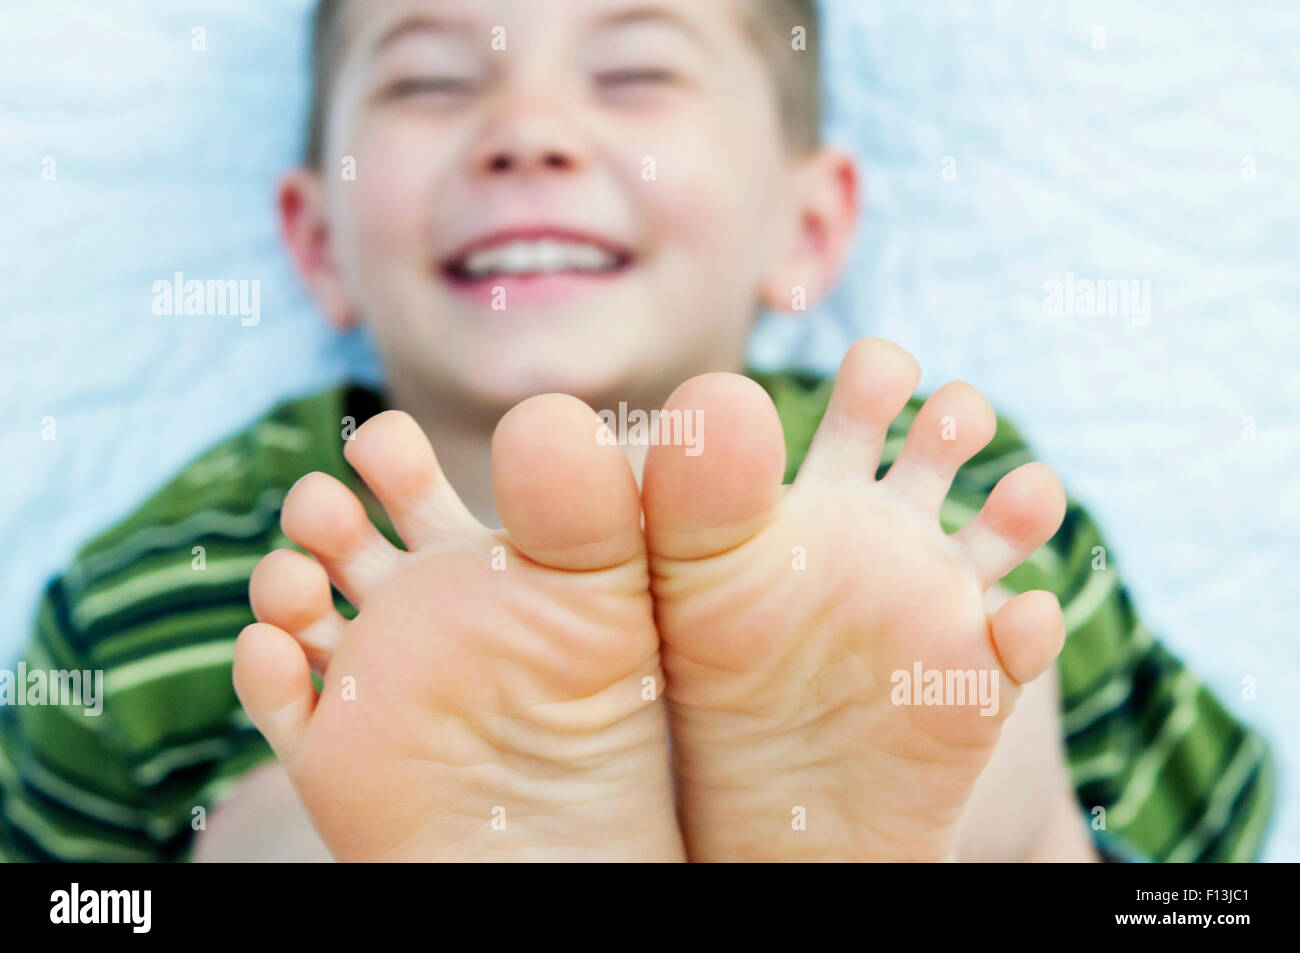 Boy smiling toes Banque D'Images